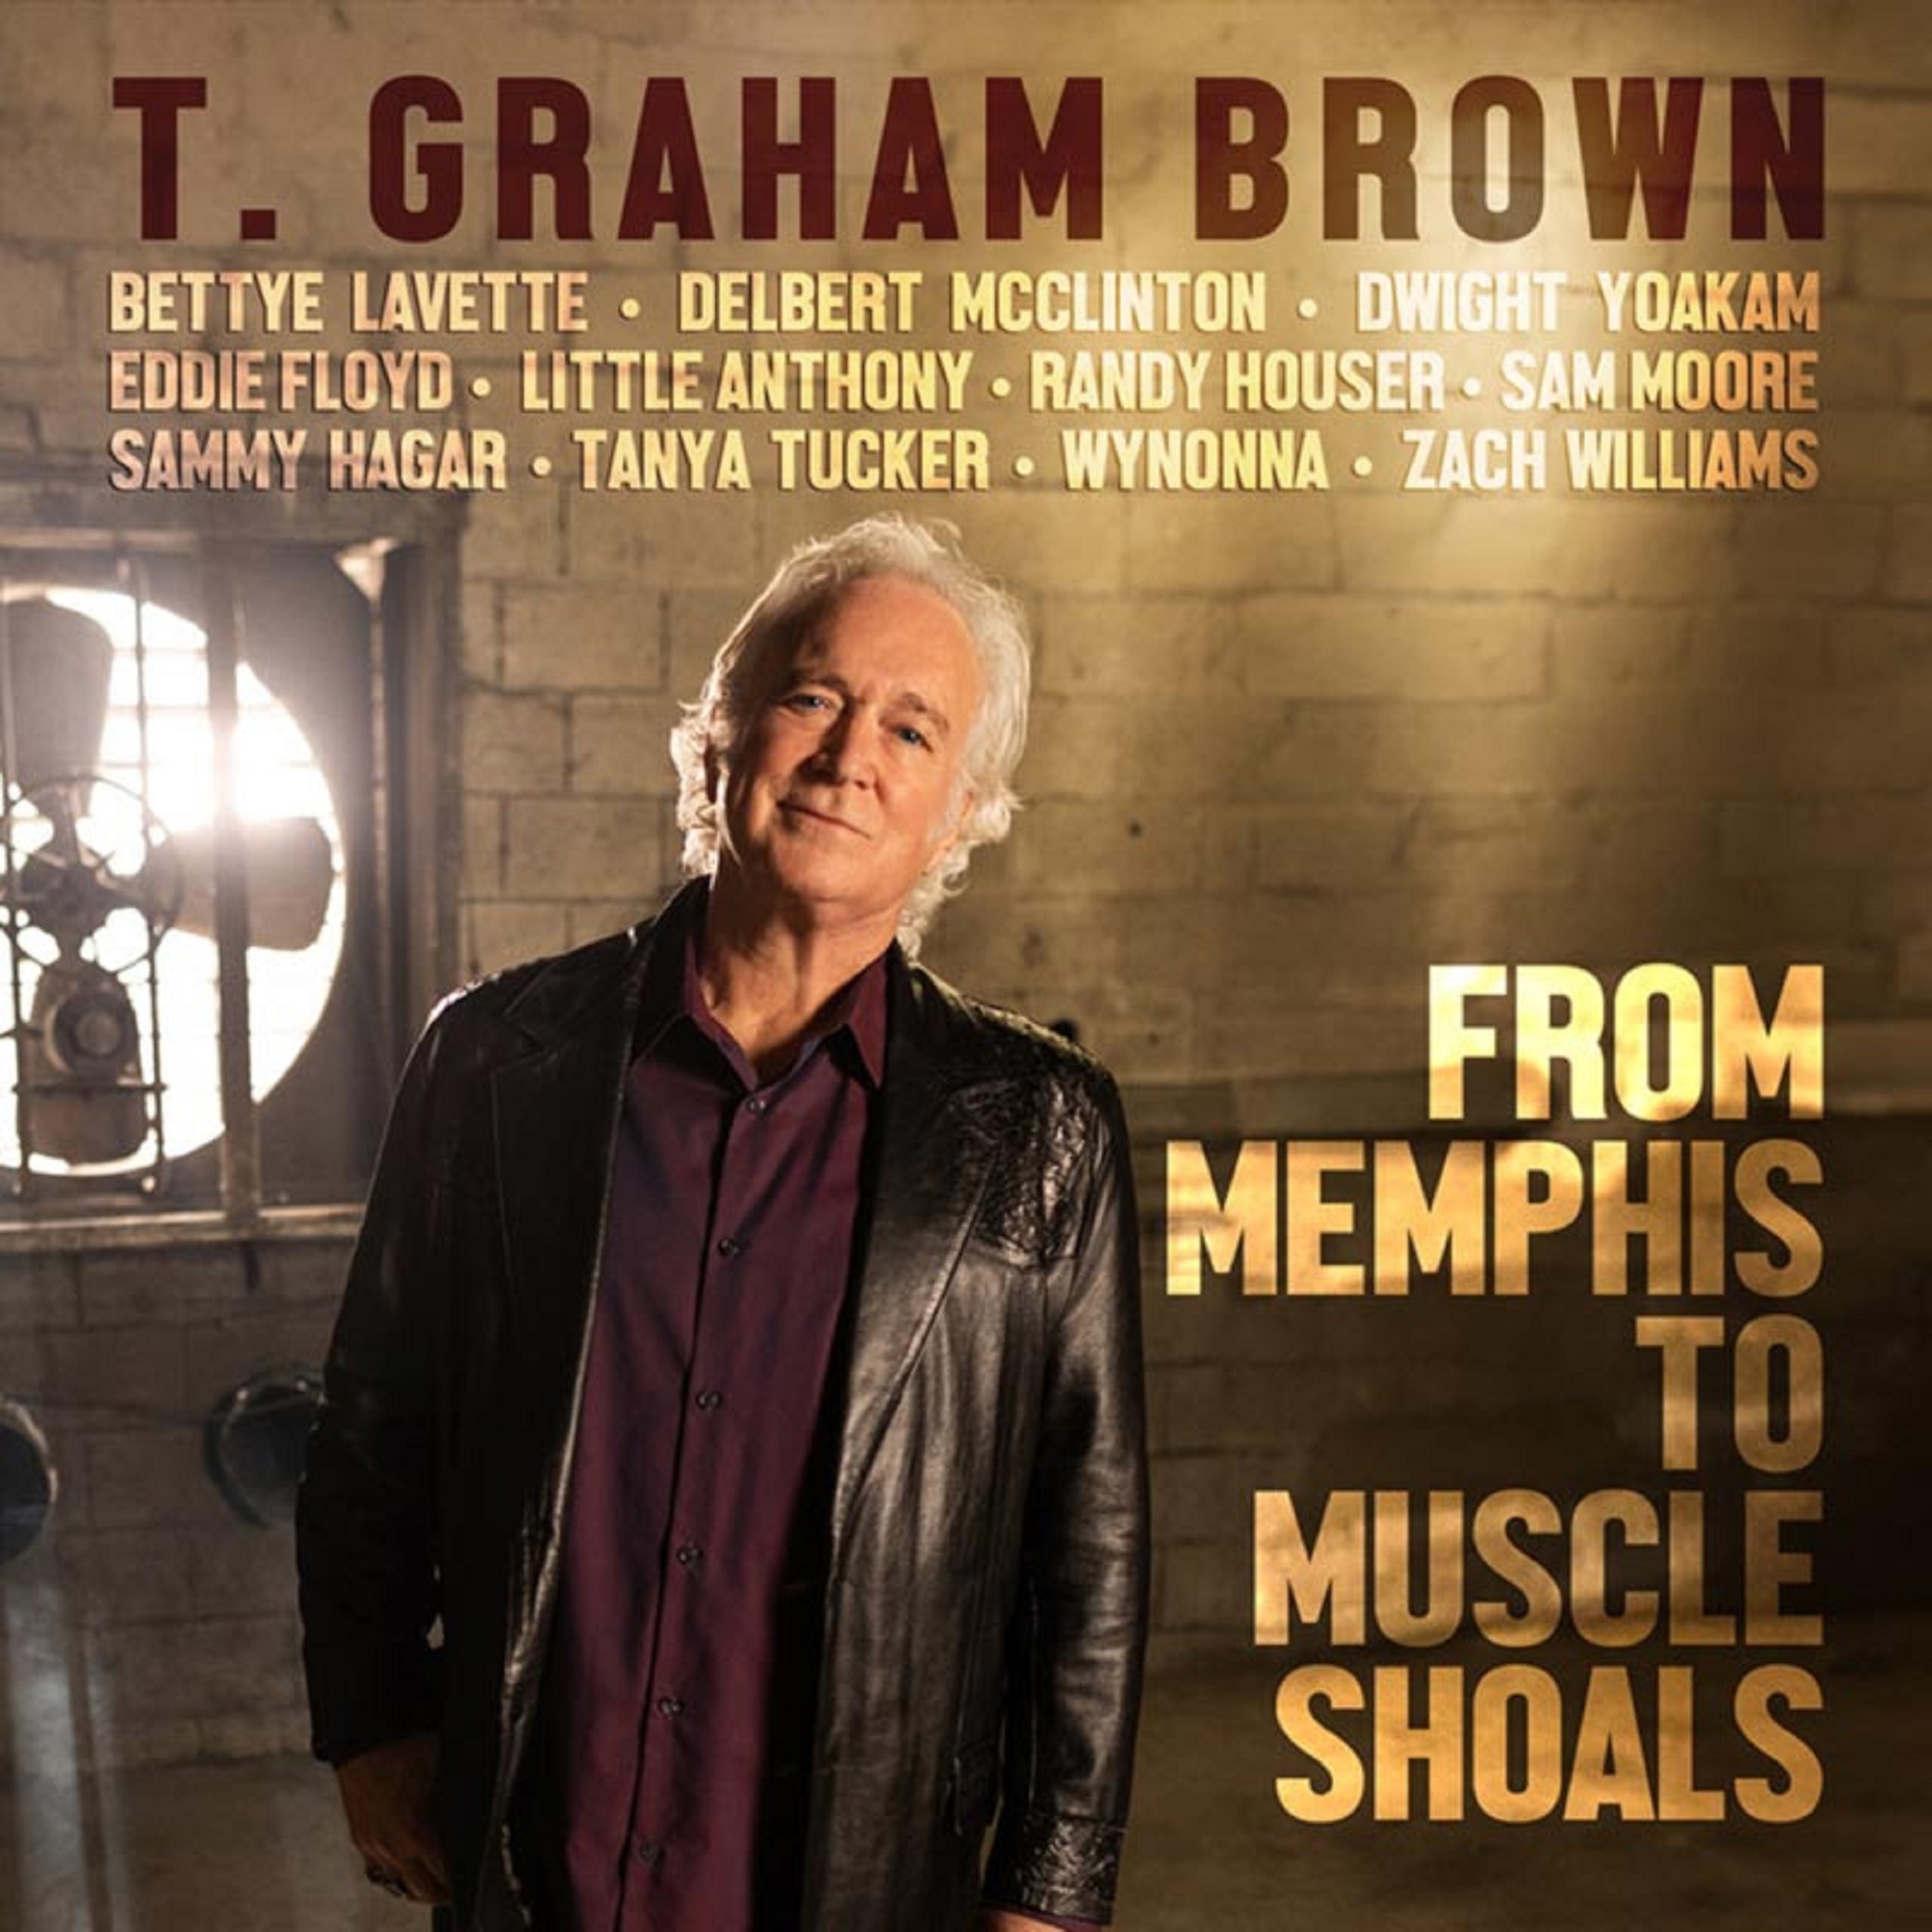 T. GRAHAM BROWN RELEASES "TAKE ME TO THE RIVER" W/ WYNONNA